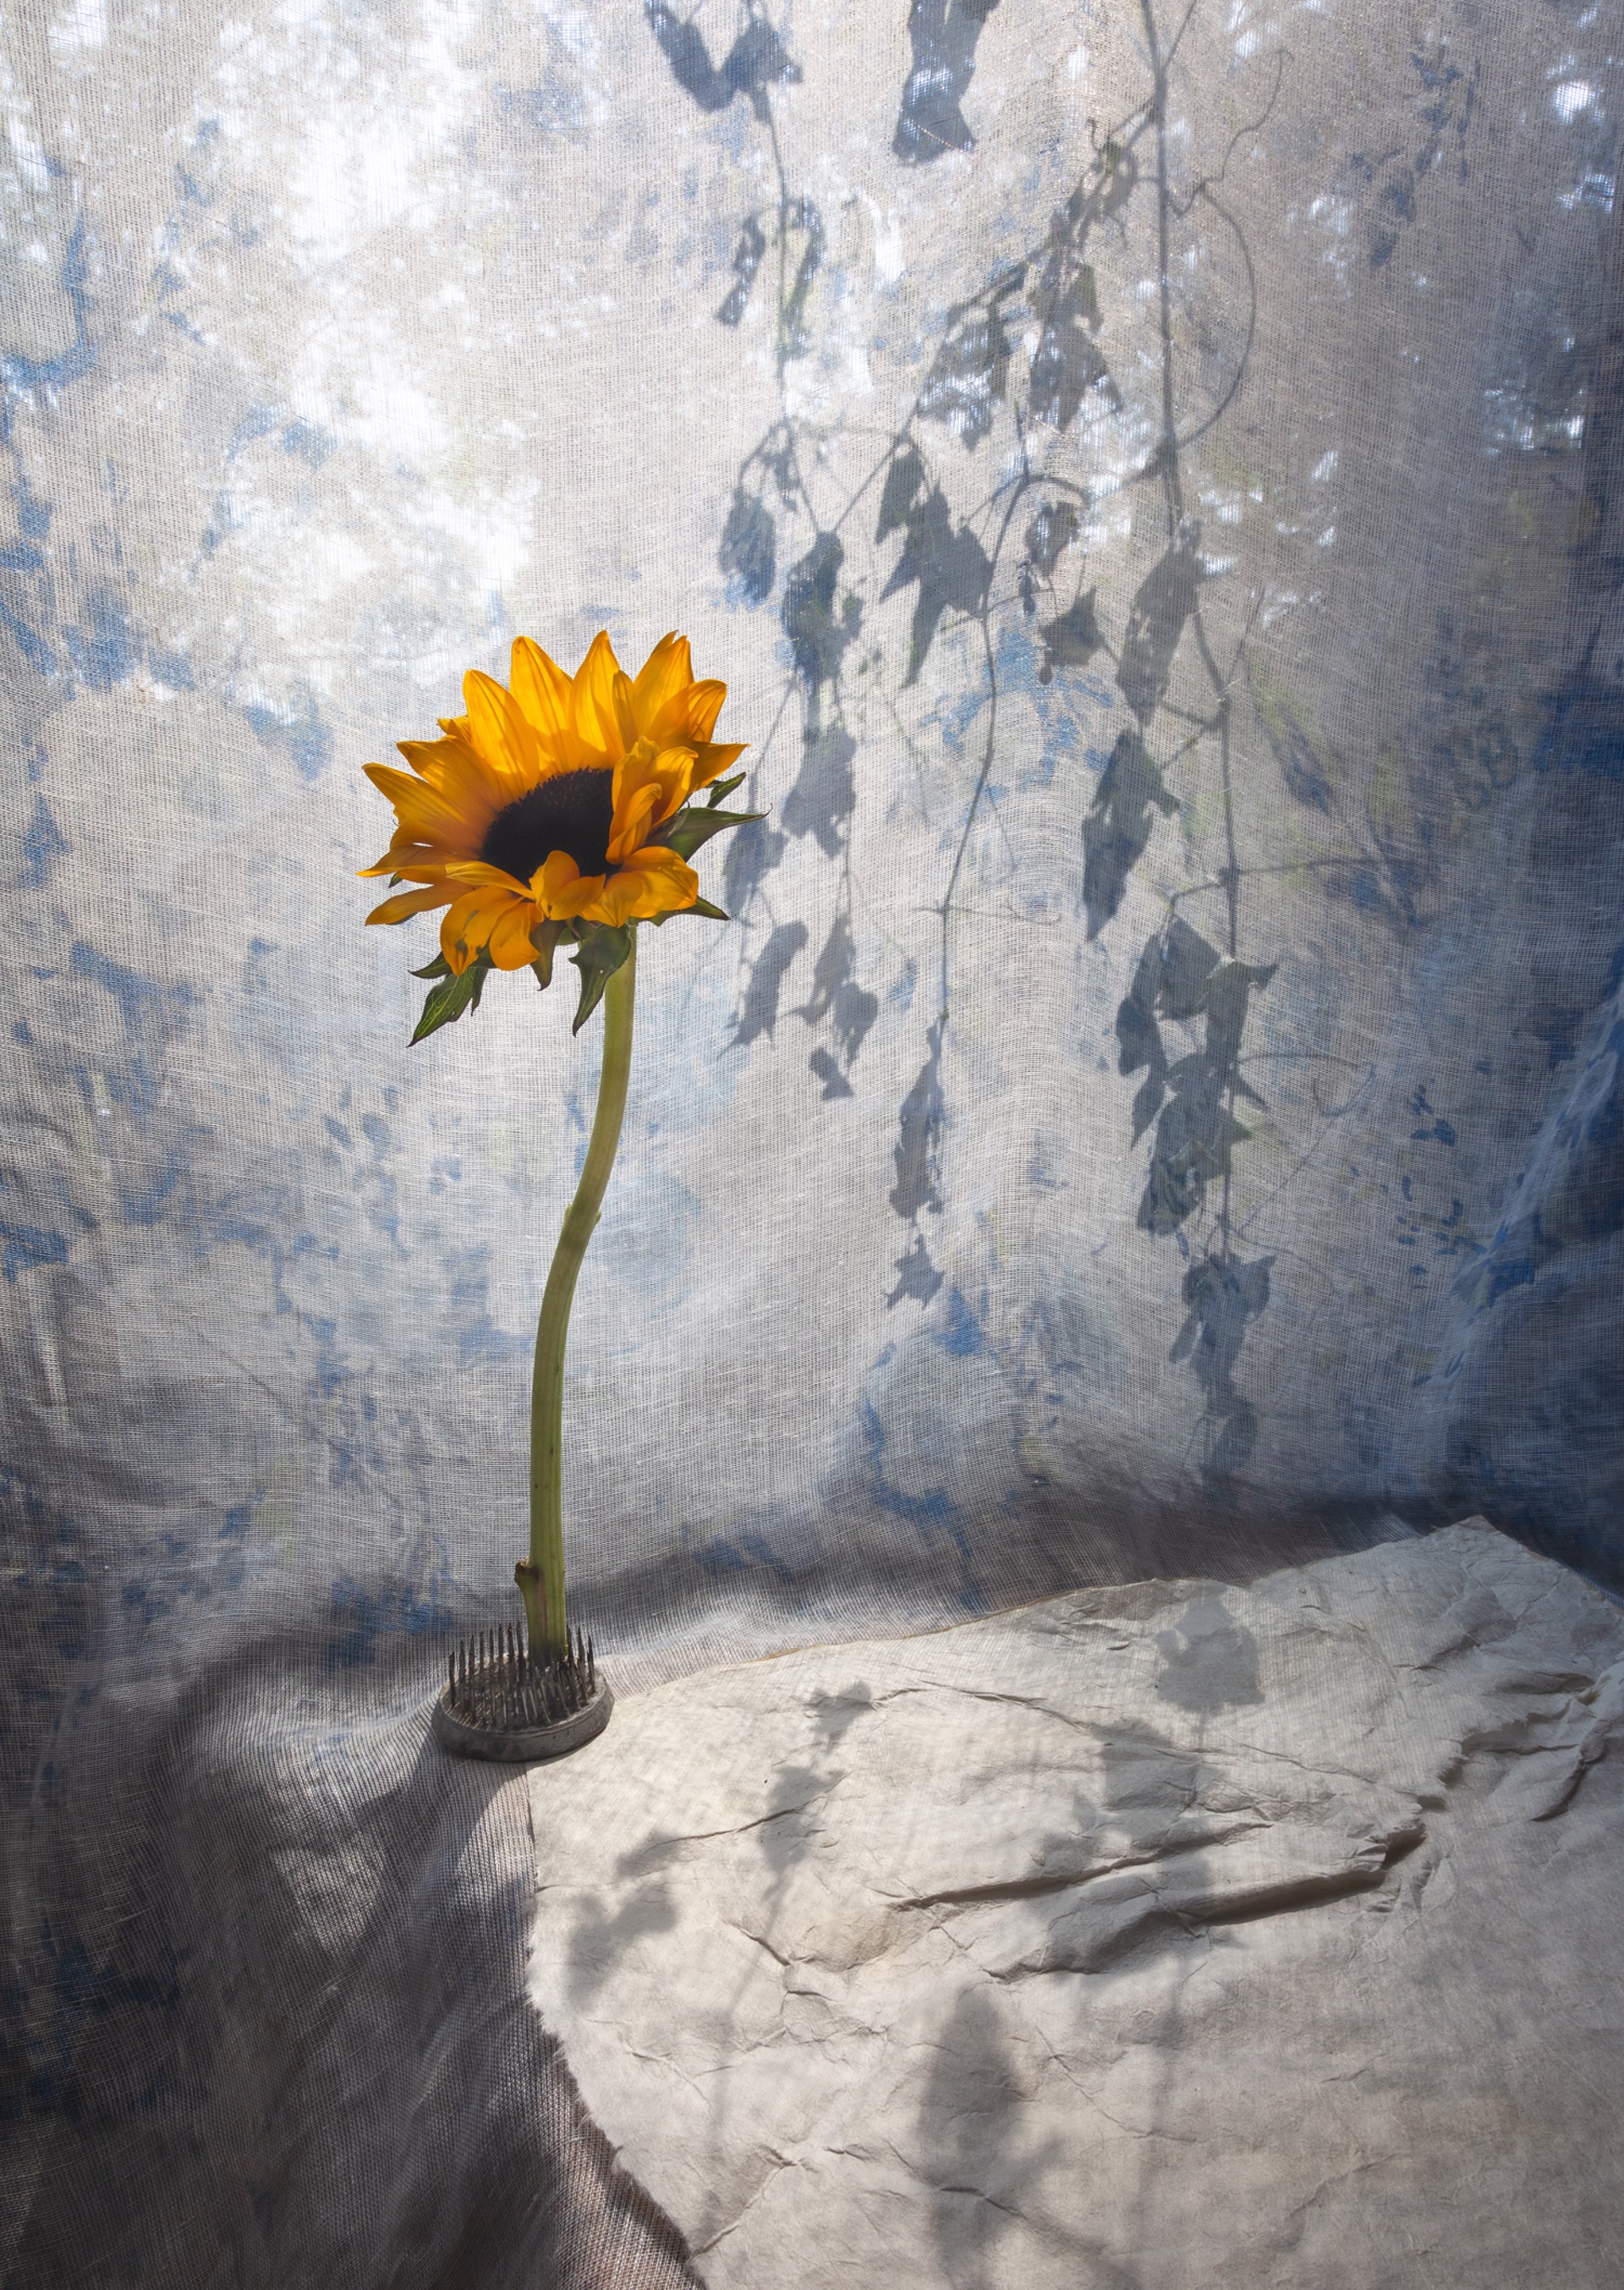 Sunflower Two by PAM FOX